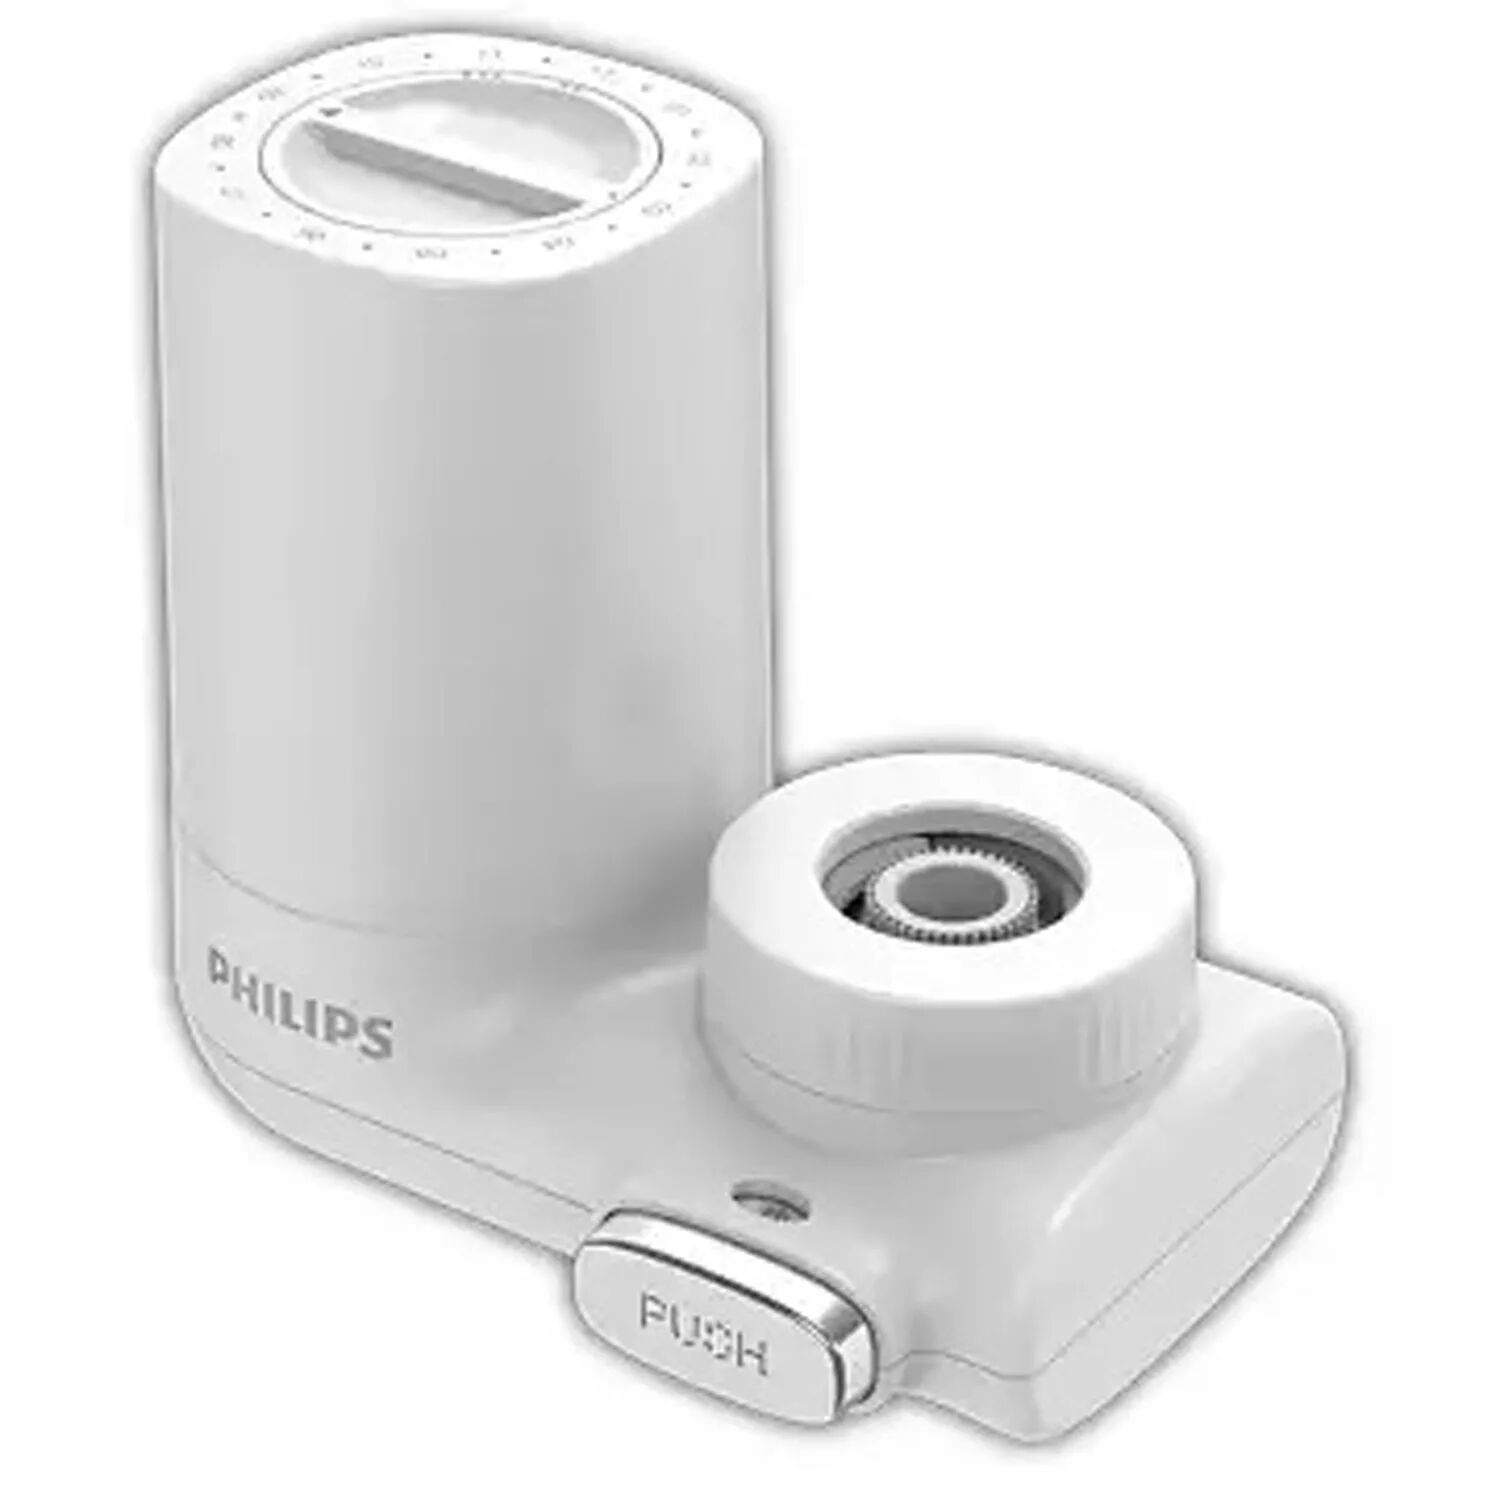 Philips Ontap X-Guard Mikrofiltrationssystem On-Tap L: 16,7 B: 13,5 H: 9,2 cm  AWP3703/10